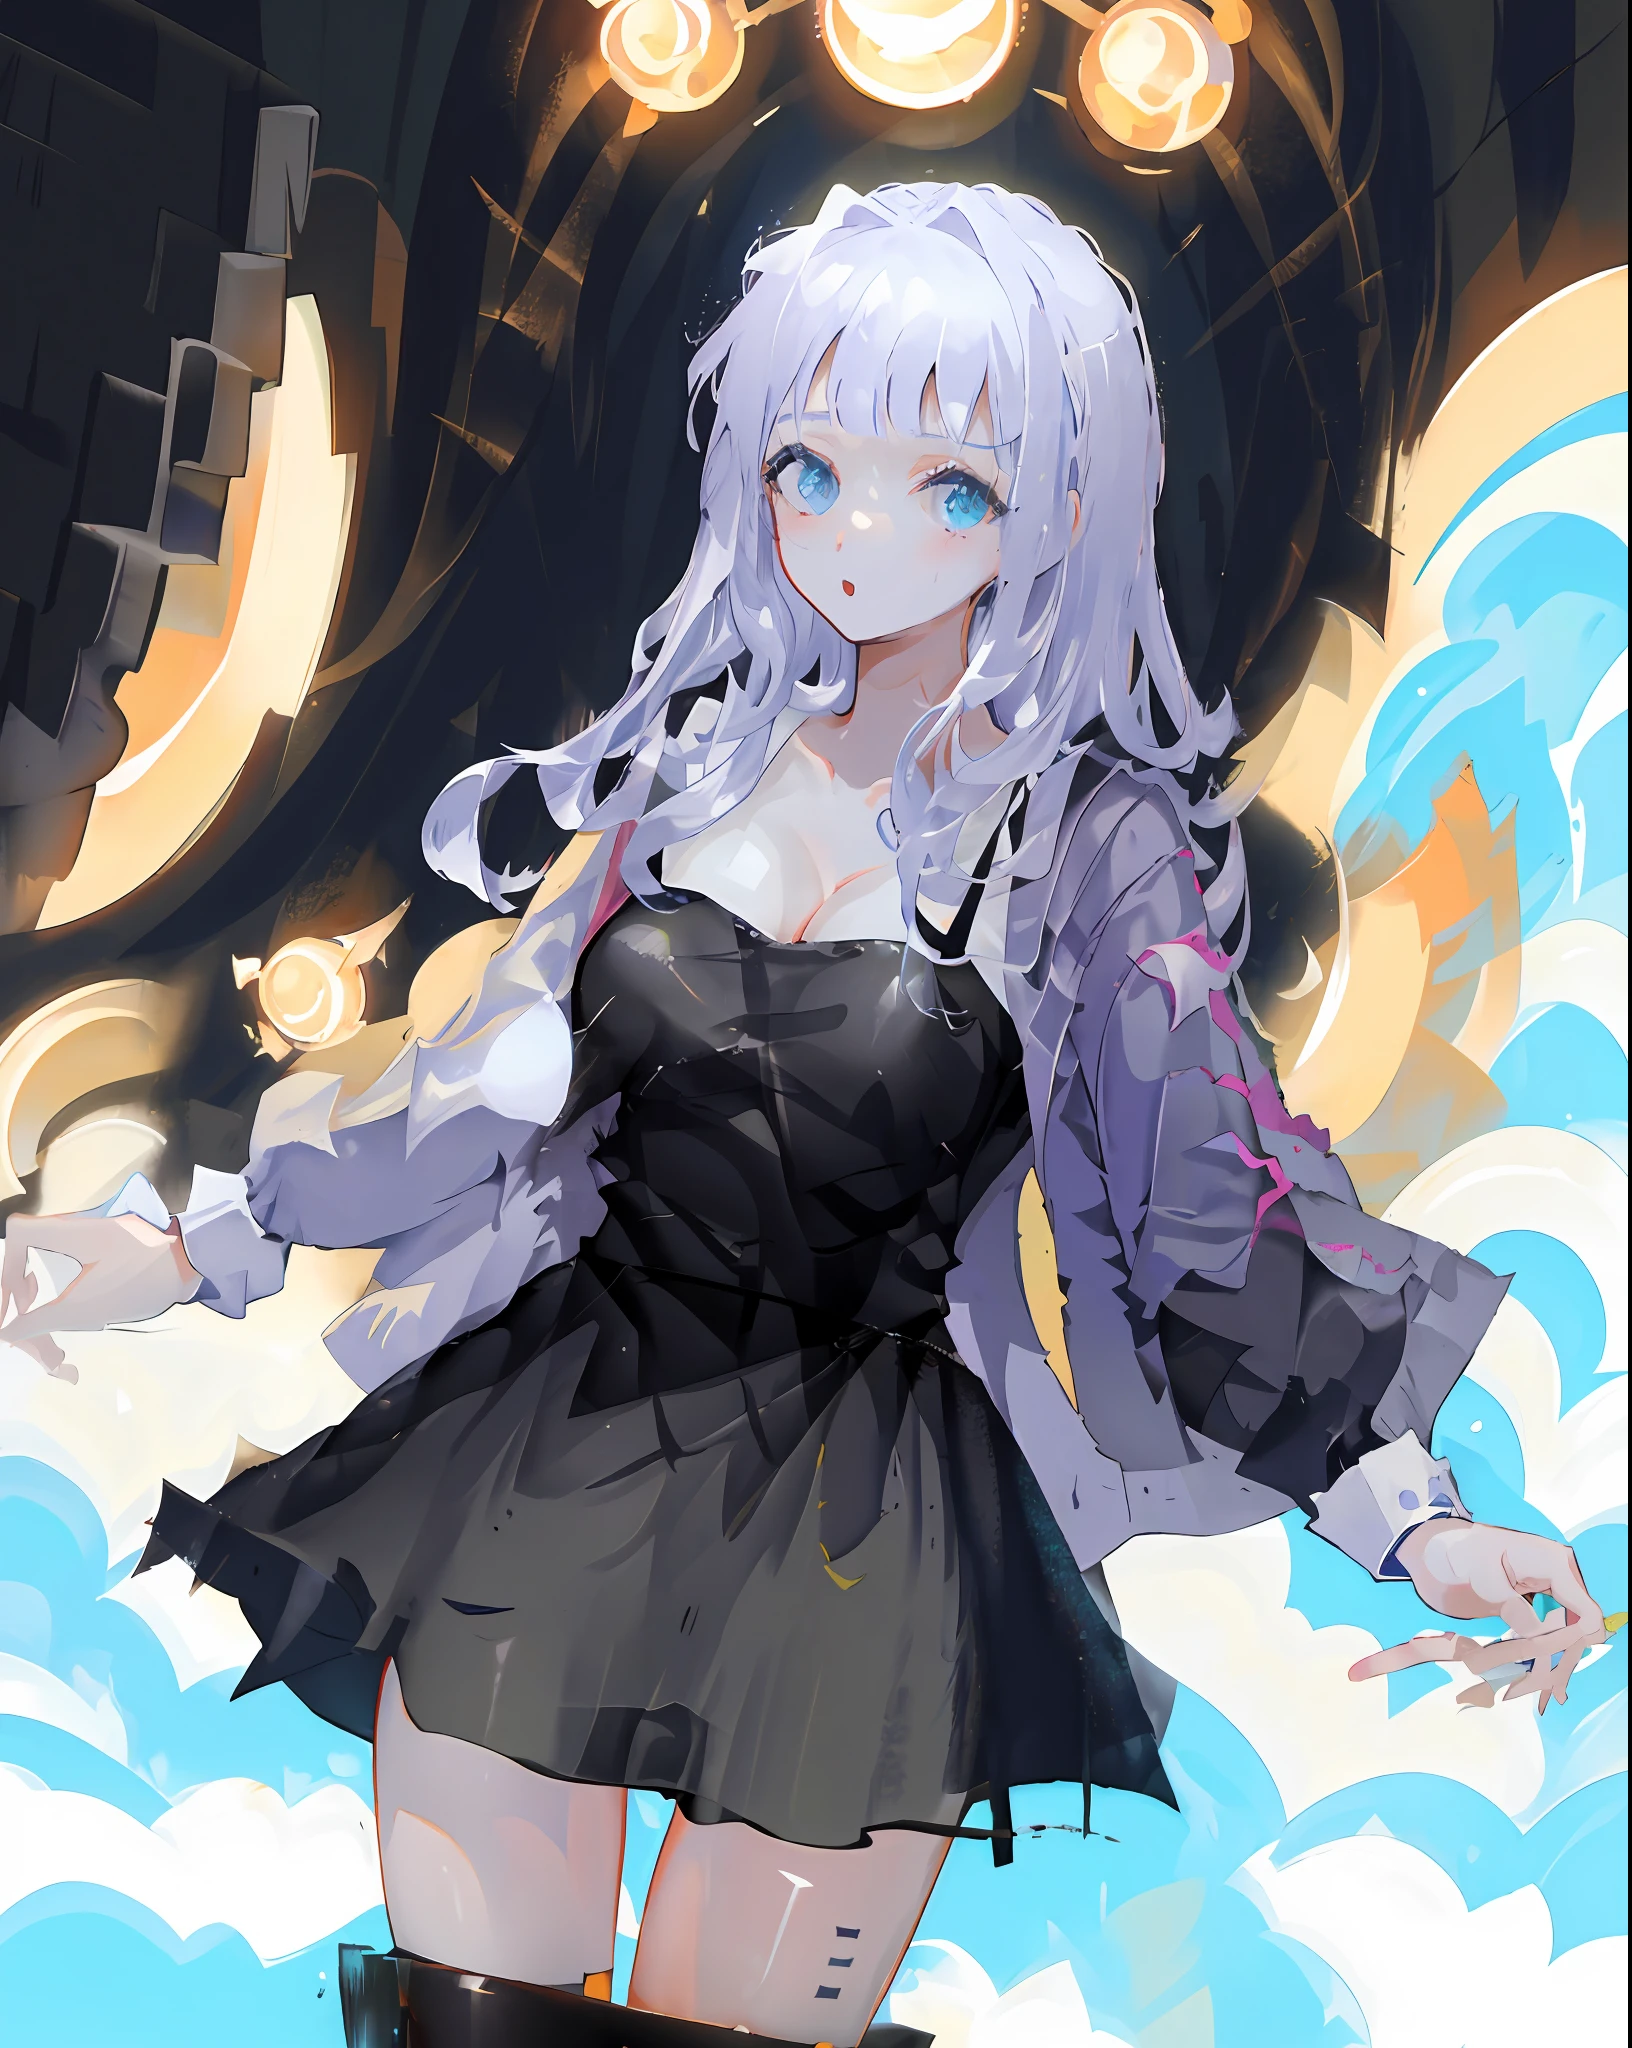 Anime Babe With Milky Tits - Anime girl in black dress with long white hair and boots - SeaArt AI